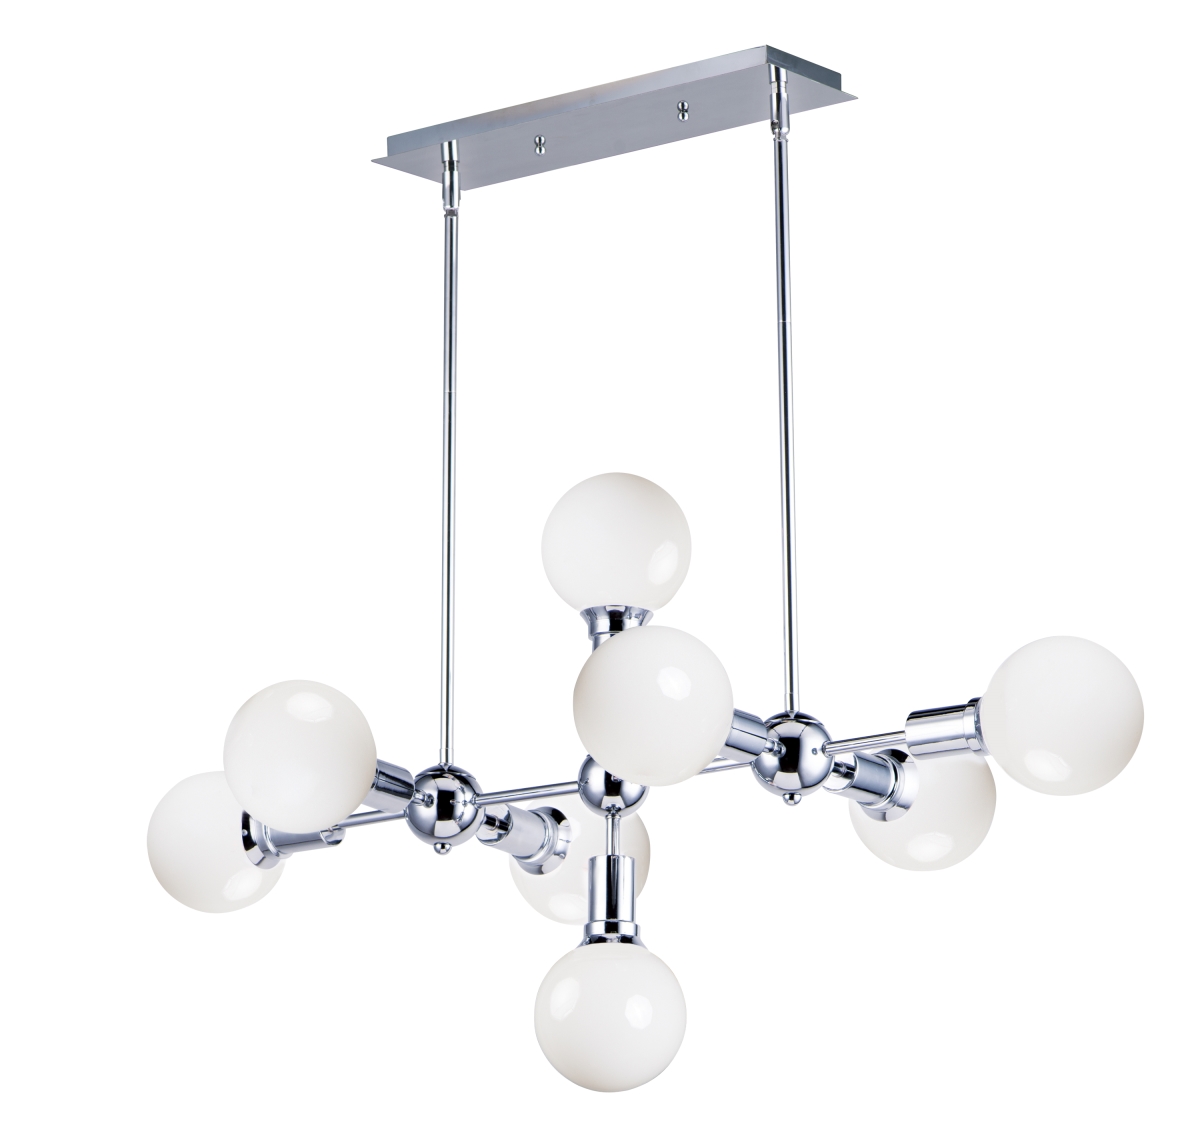 11348pc 39 In. Molecule Eight-light Linear Pendant Ceiling Light, Polished Chrome